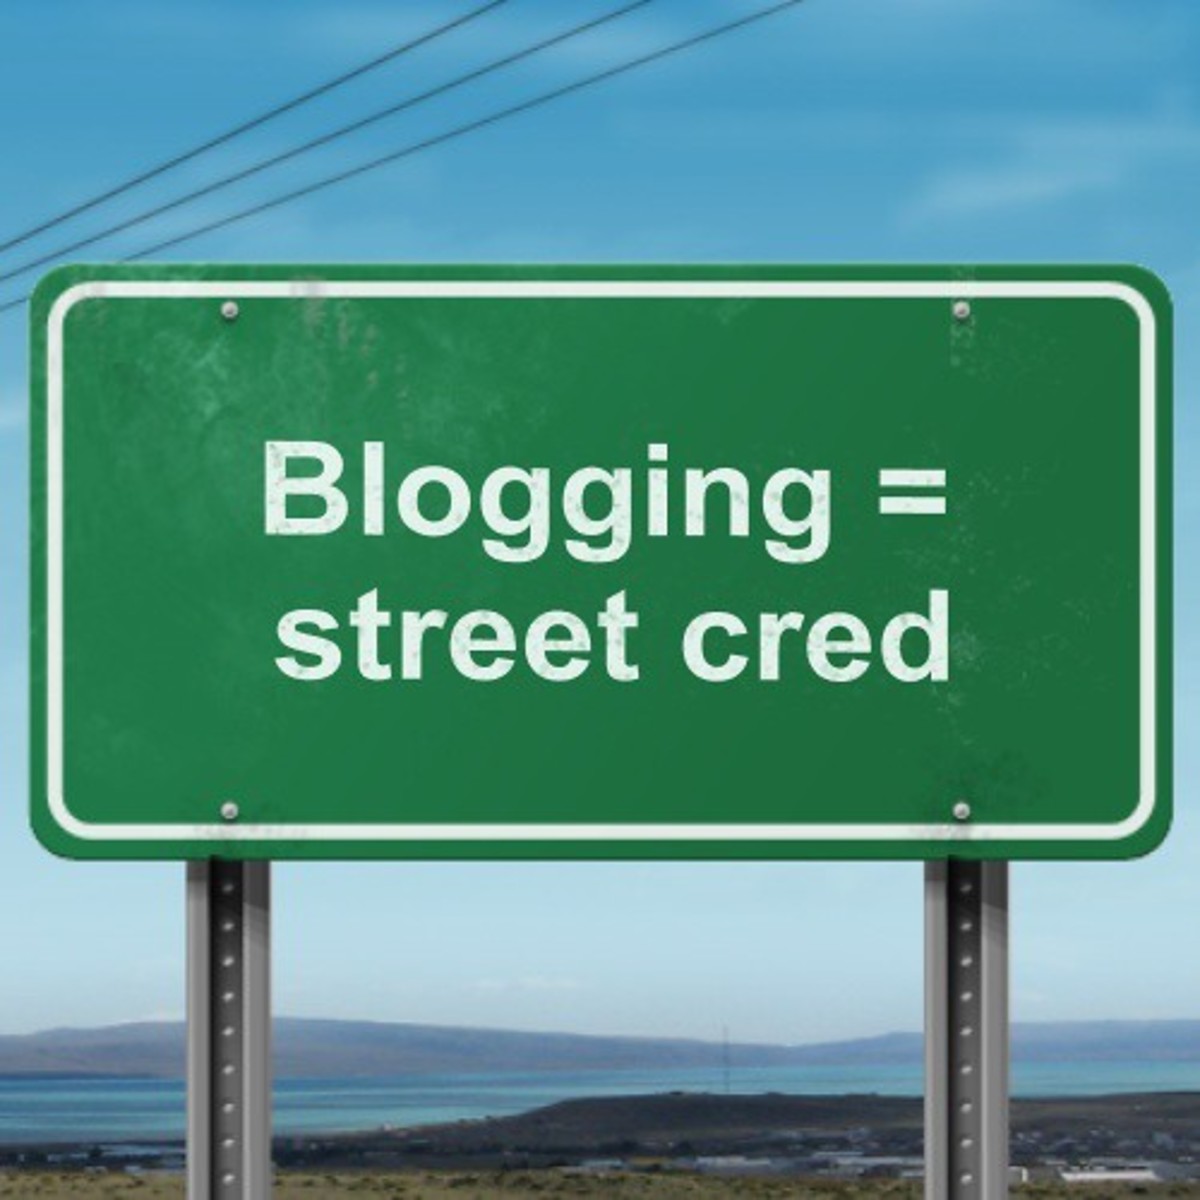 8 Ways Blogging Can Help Grow Your Business